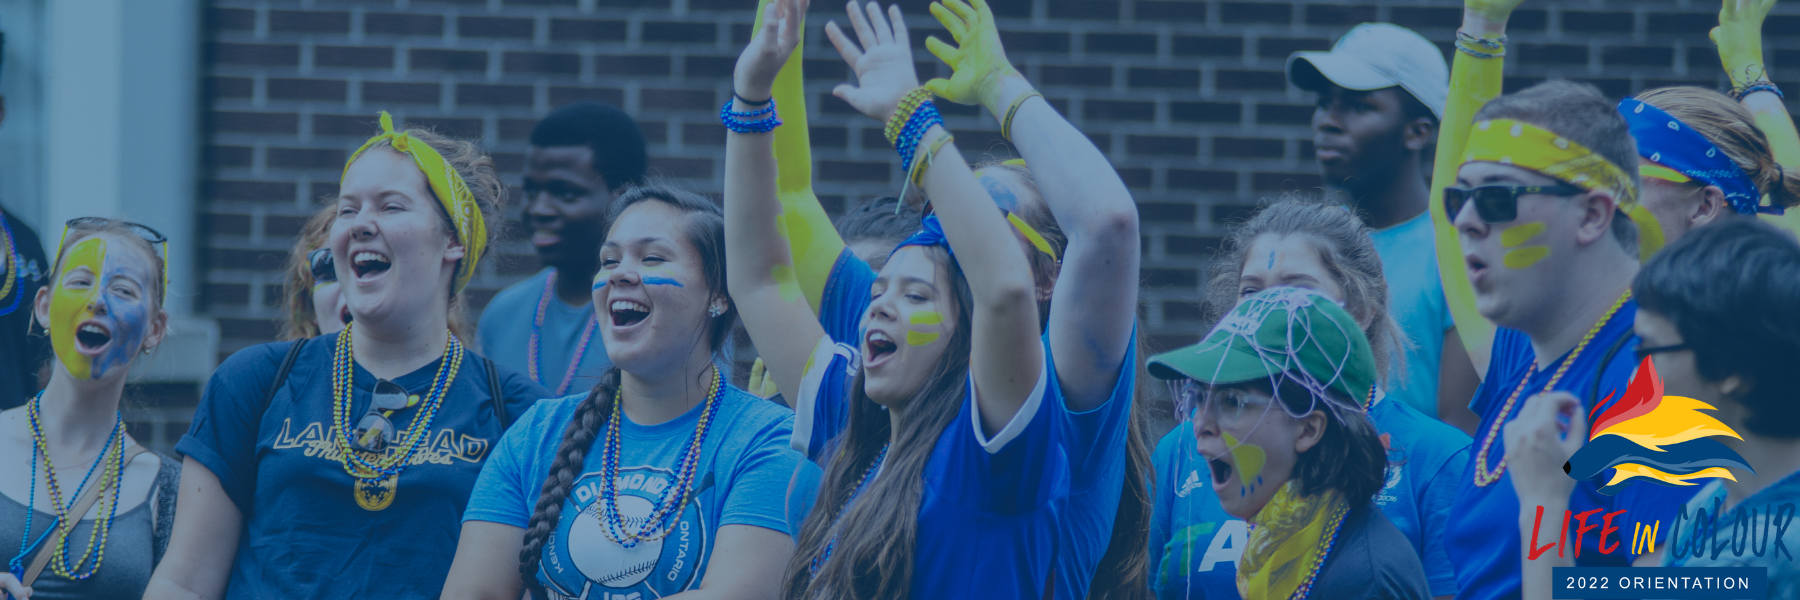 Group of Lakehead students wearing blue and yellow spirit wear cheering and smiling while having fun at Orientation. The Life in Colour, Orientation 2022 rainbow wolf head logo is located in the bottom right corner of the image.